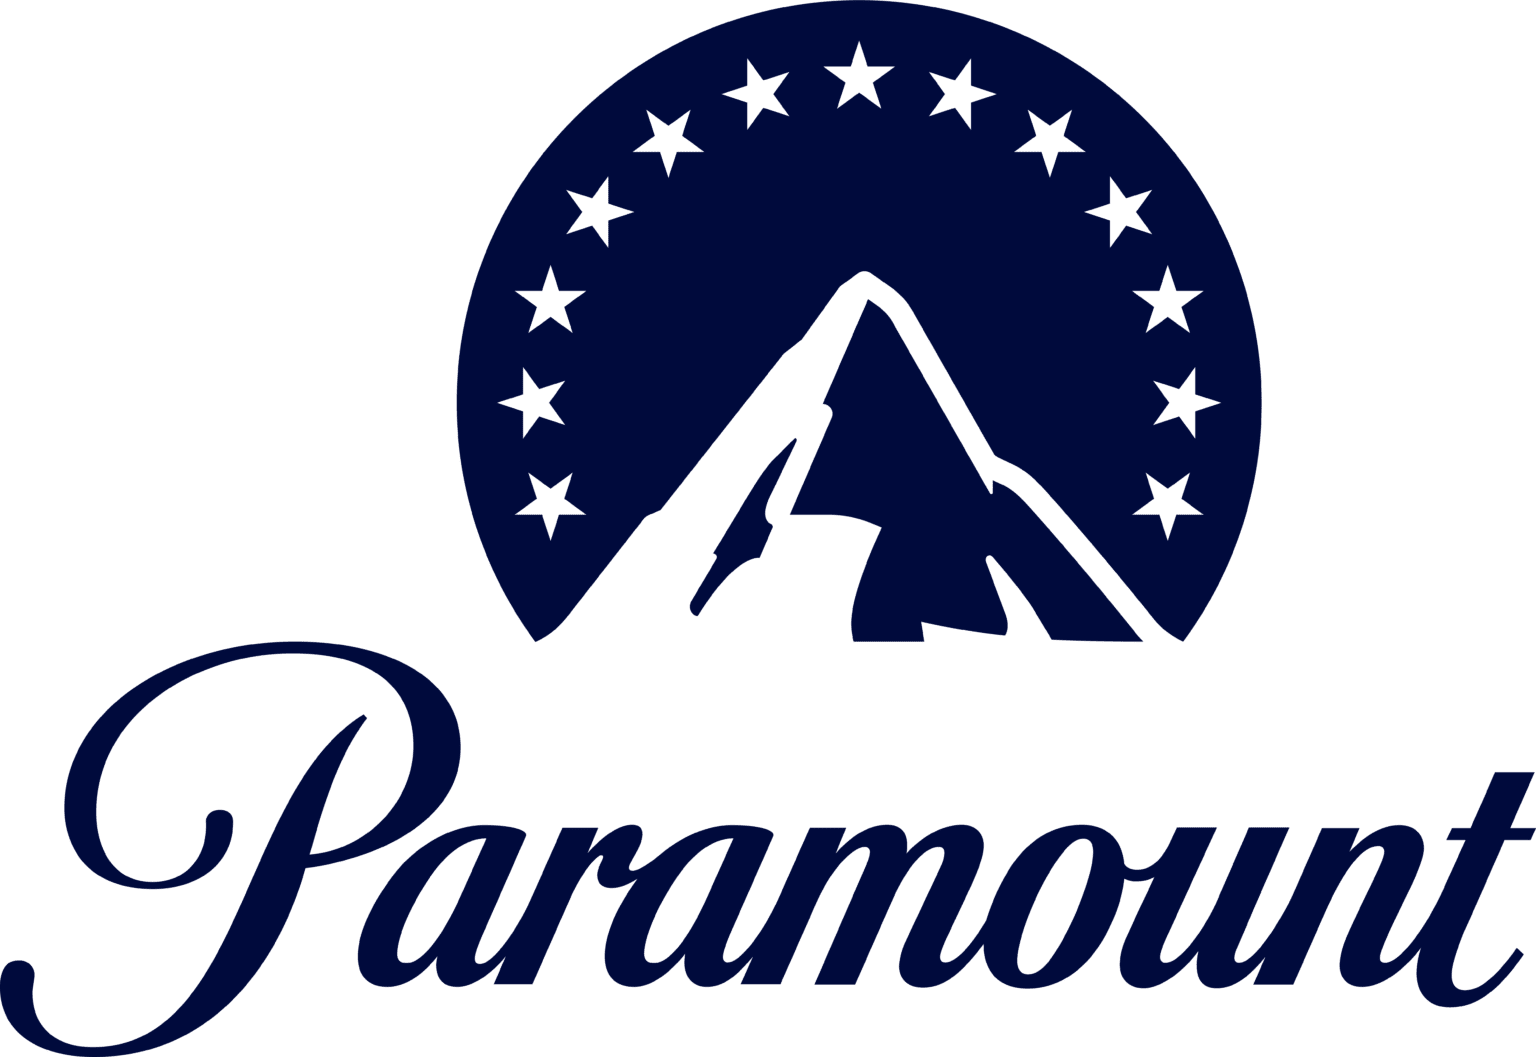 This is an image of the Paramount logo.